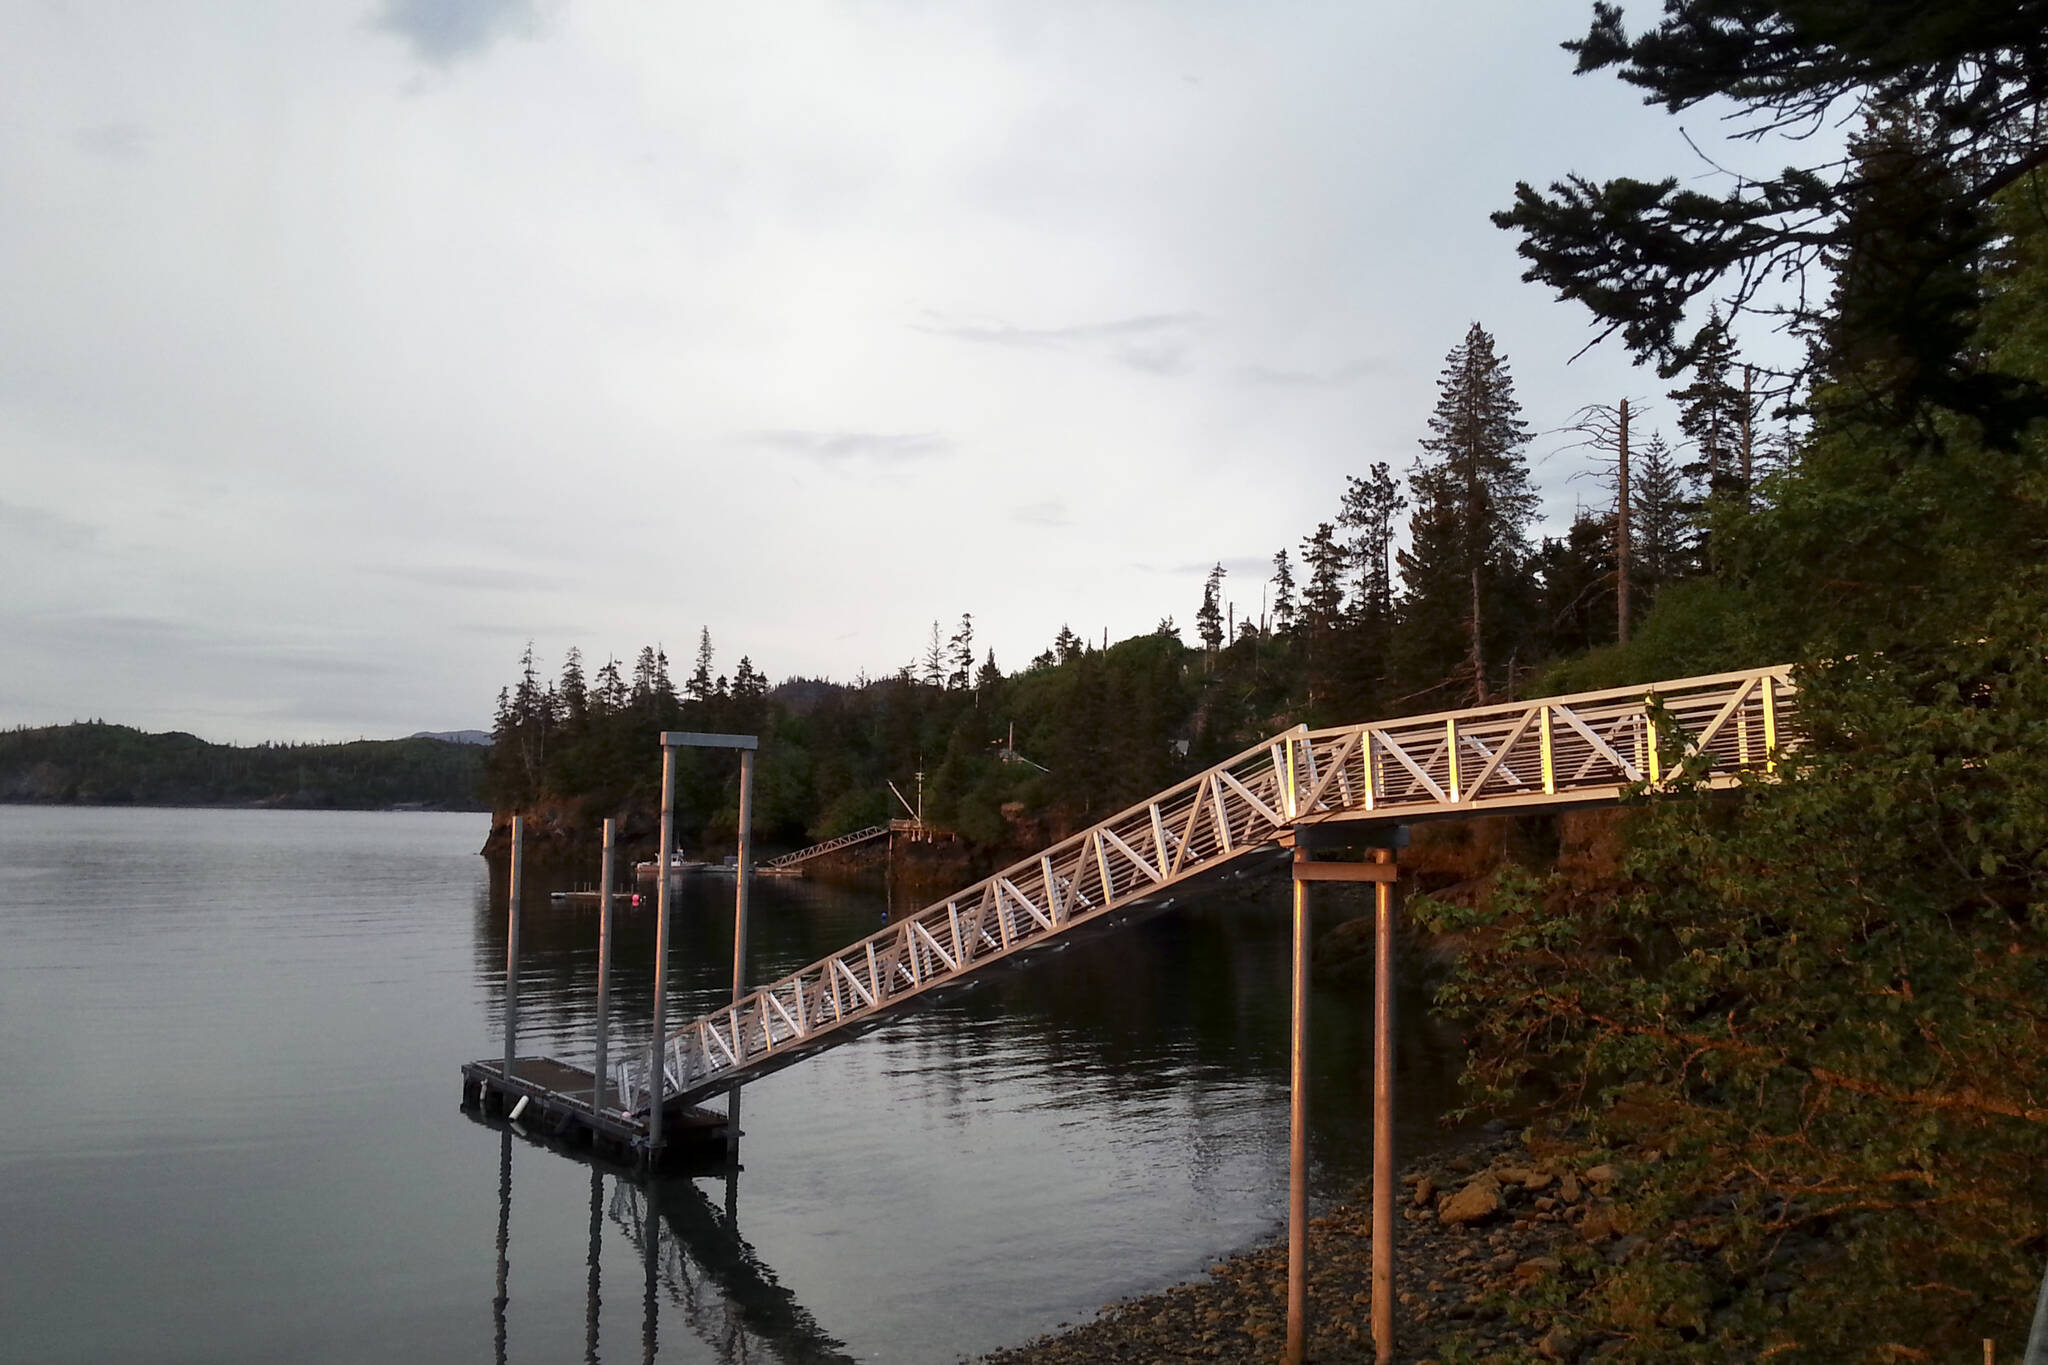 Photo provided
A new dock at the Center for Alaskan Coastal Studies’ Peterson Bay Field Station was among the accomplishments during its fourth decade.